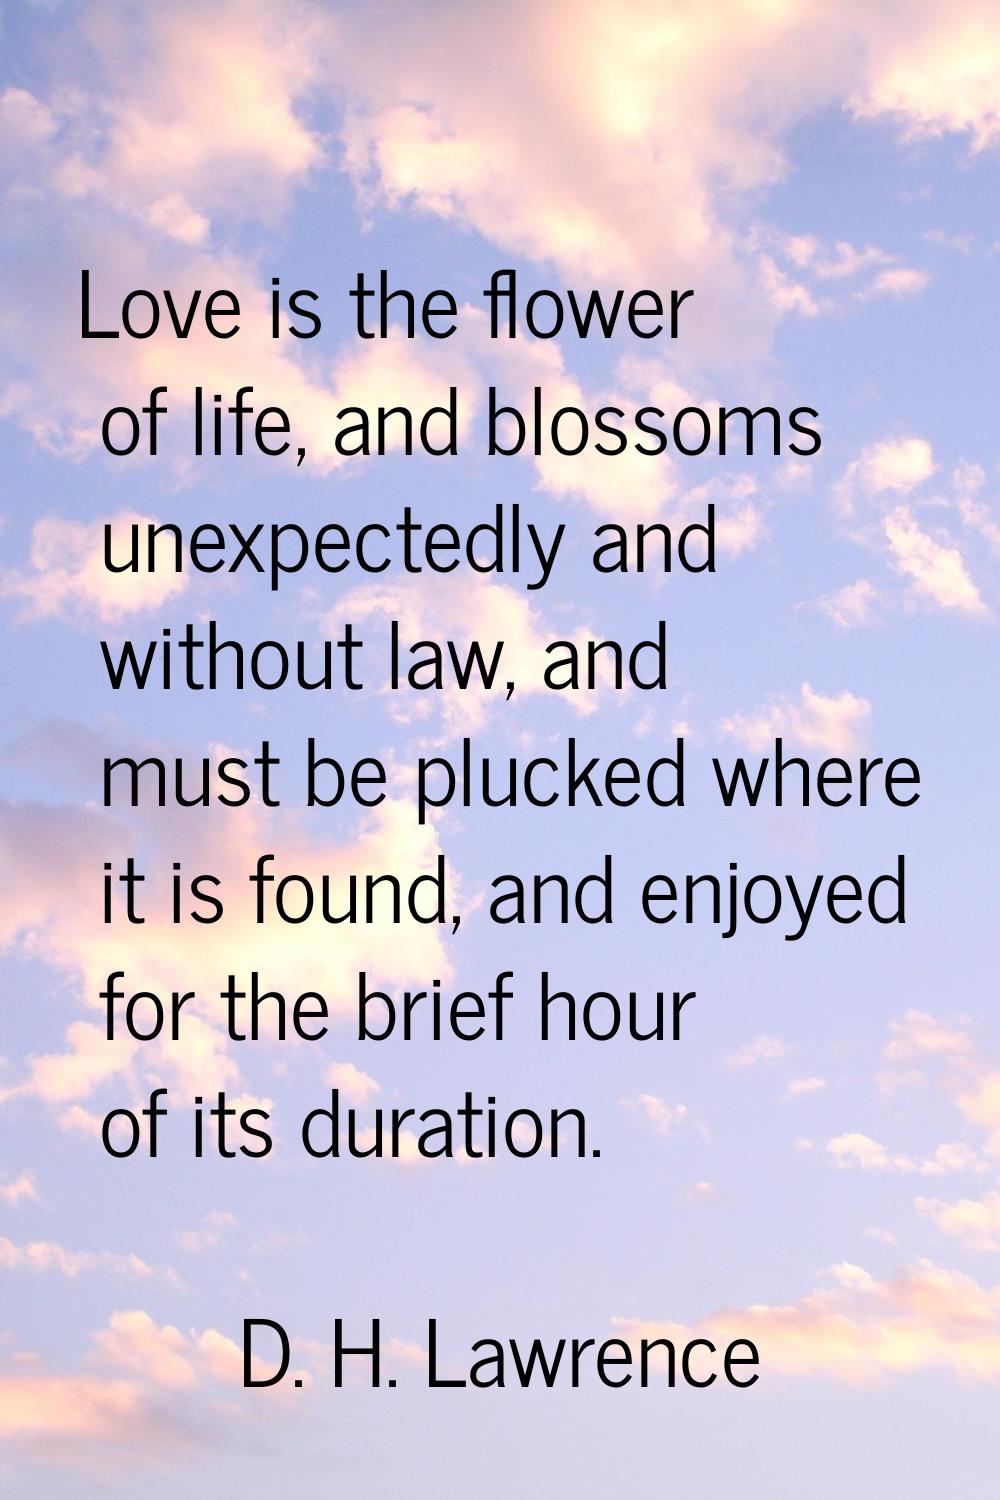 Love is the flower of life, and blossoms unexpectedly and without law, and must be plucked where it